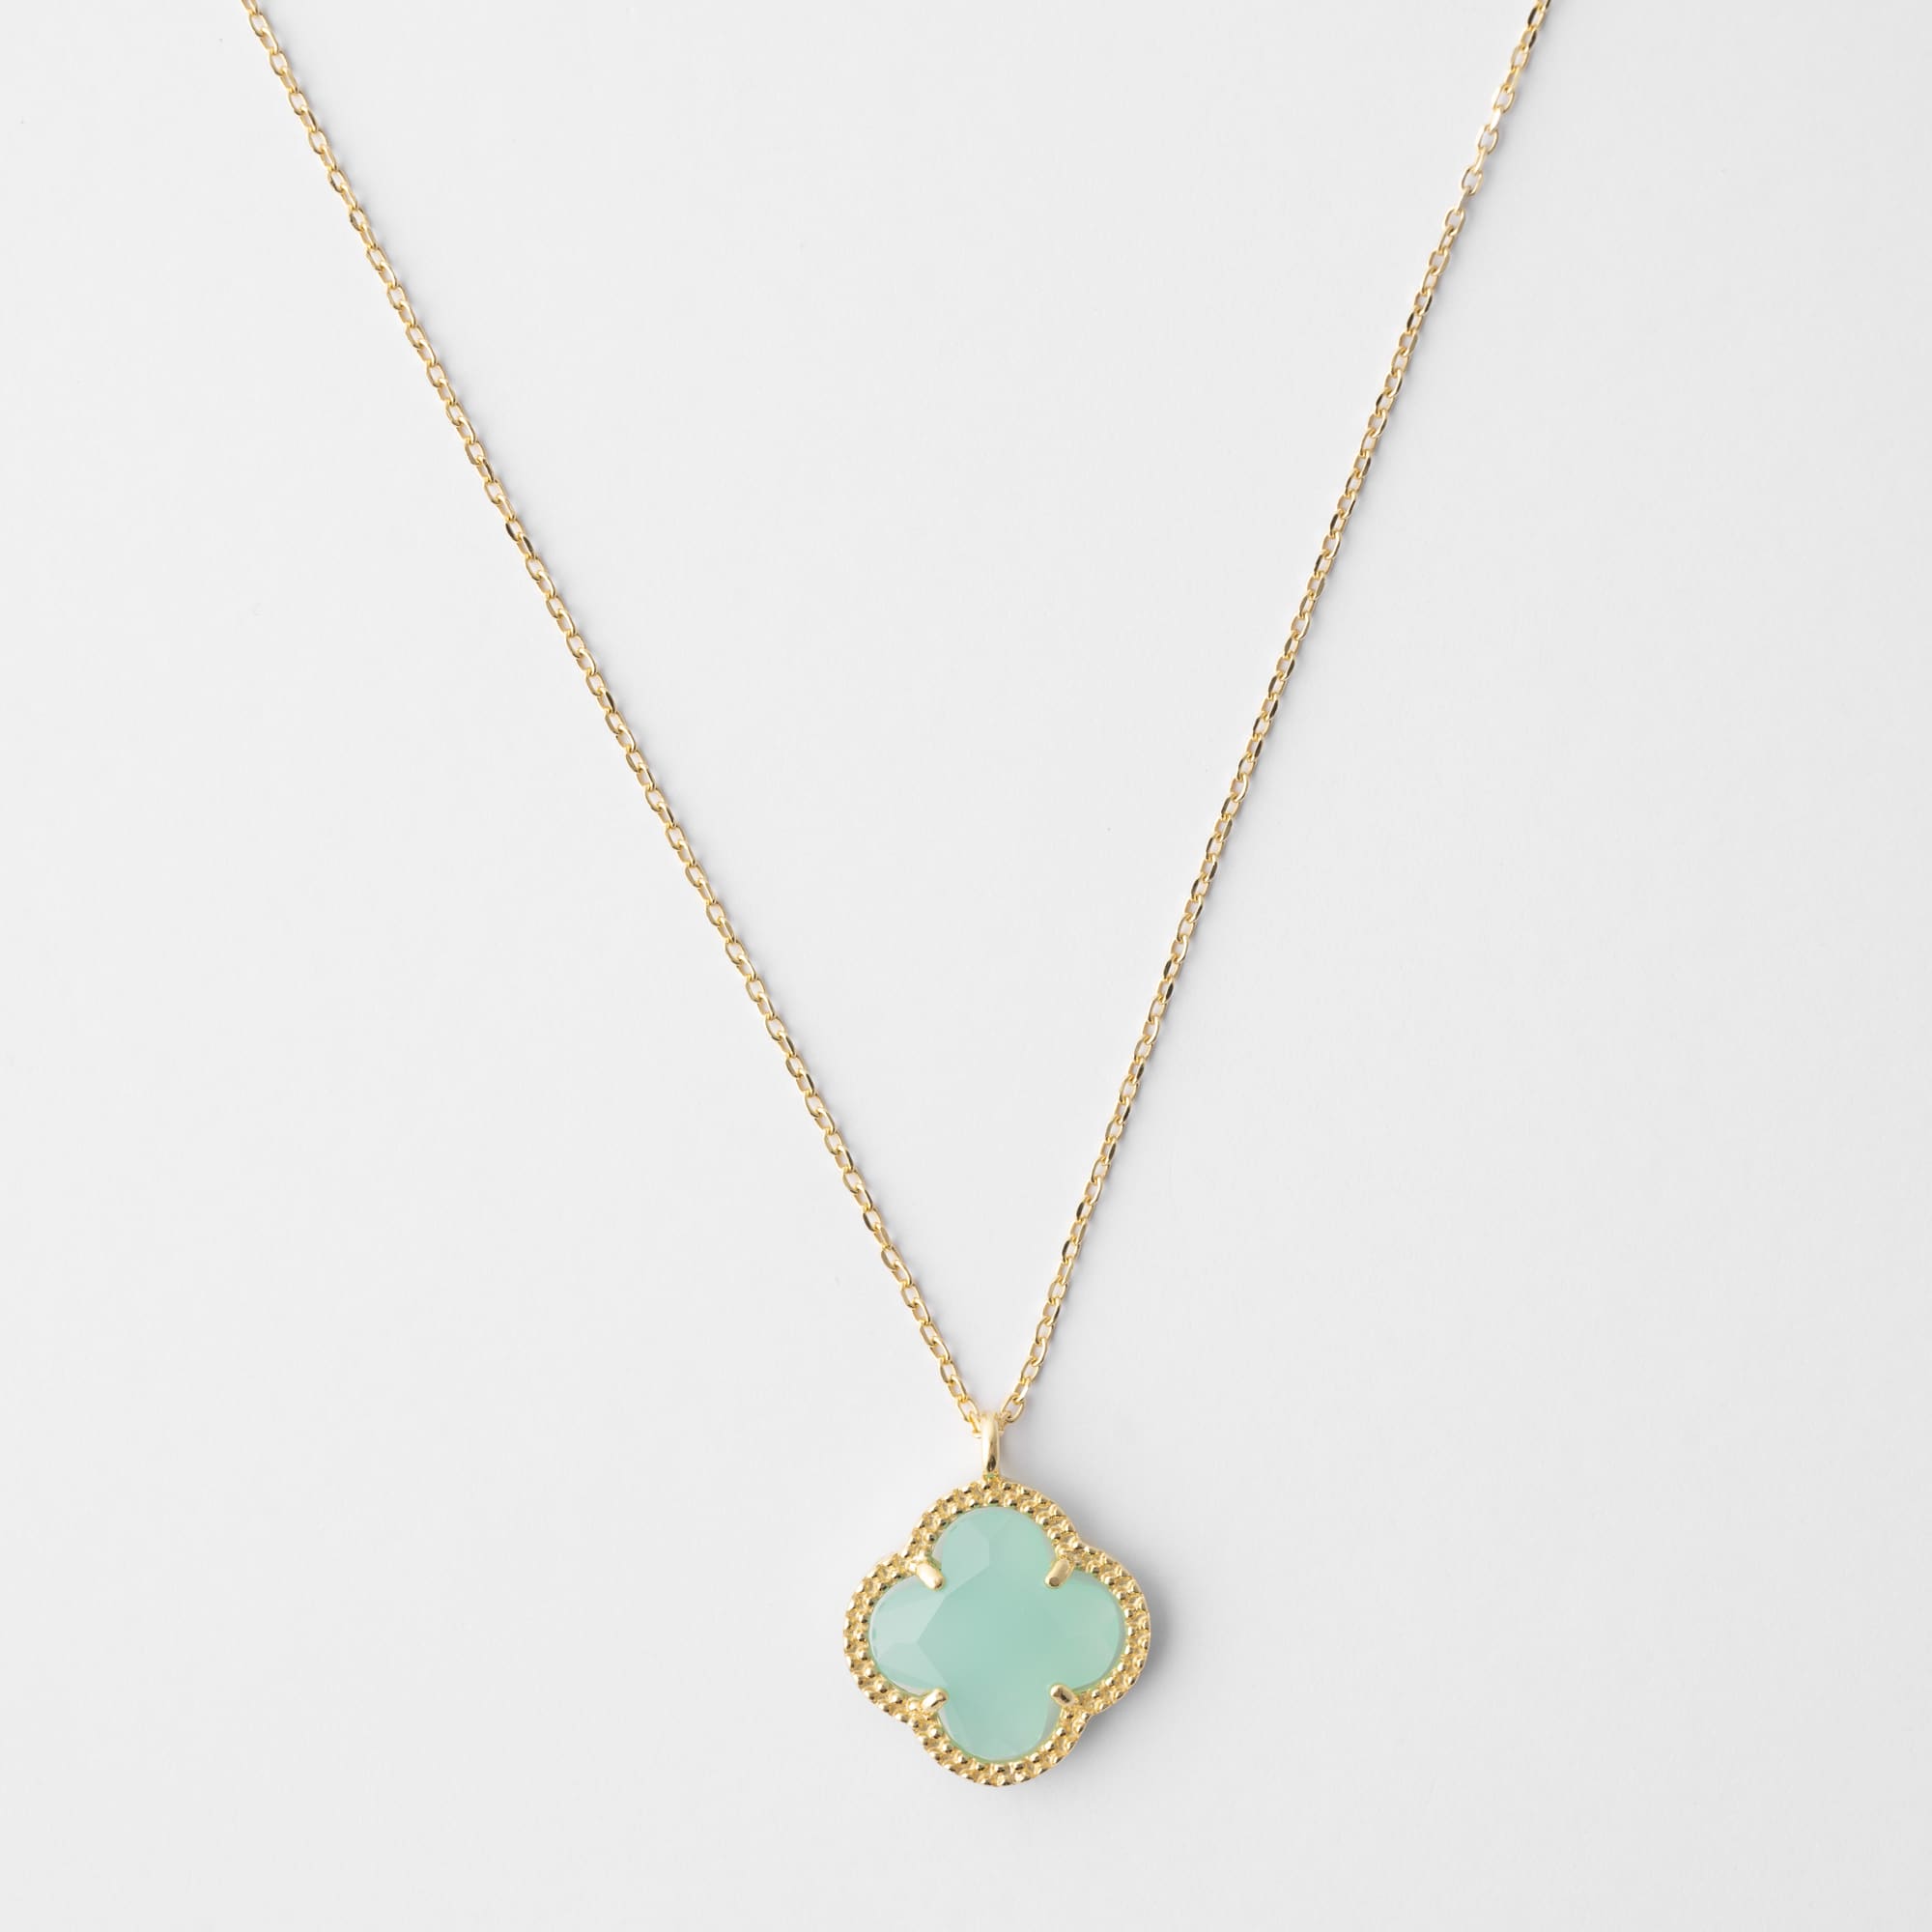 Citerna 9ct Yellow Gold Pendant Necklace with 46cm Chain, Horn of Plenty  Pendant - Necklaces from Prime Jewellery UK